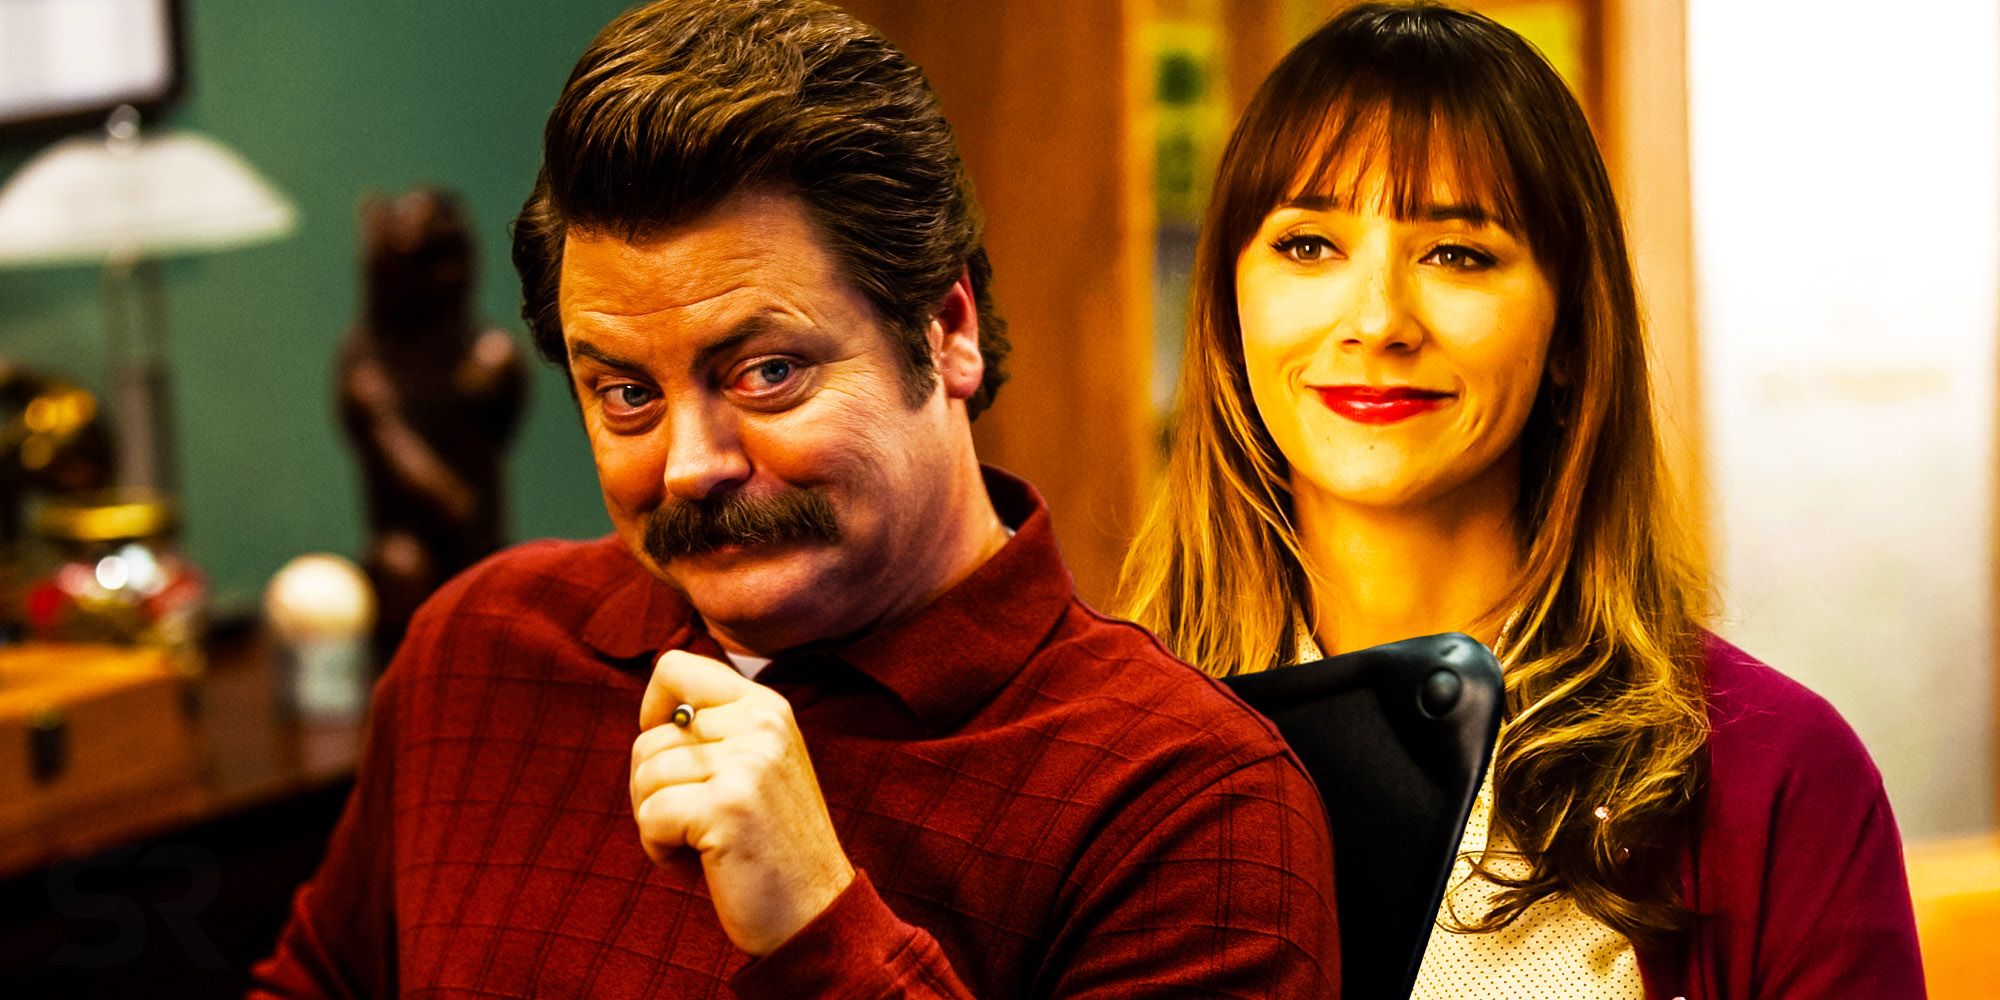 Parks and Rec Ron swanson nick offerman ann perkins